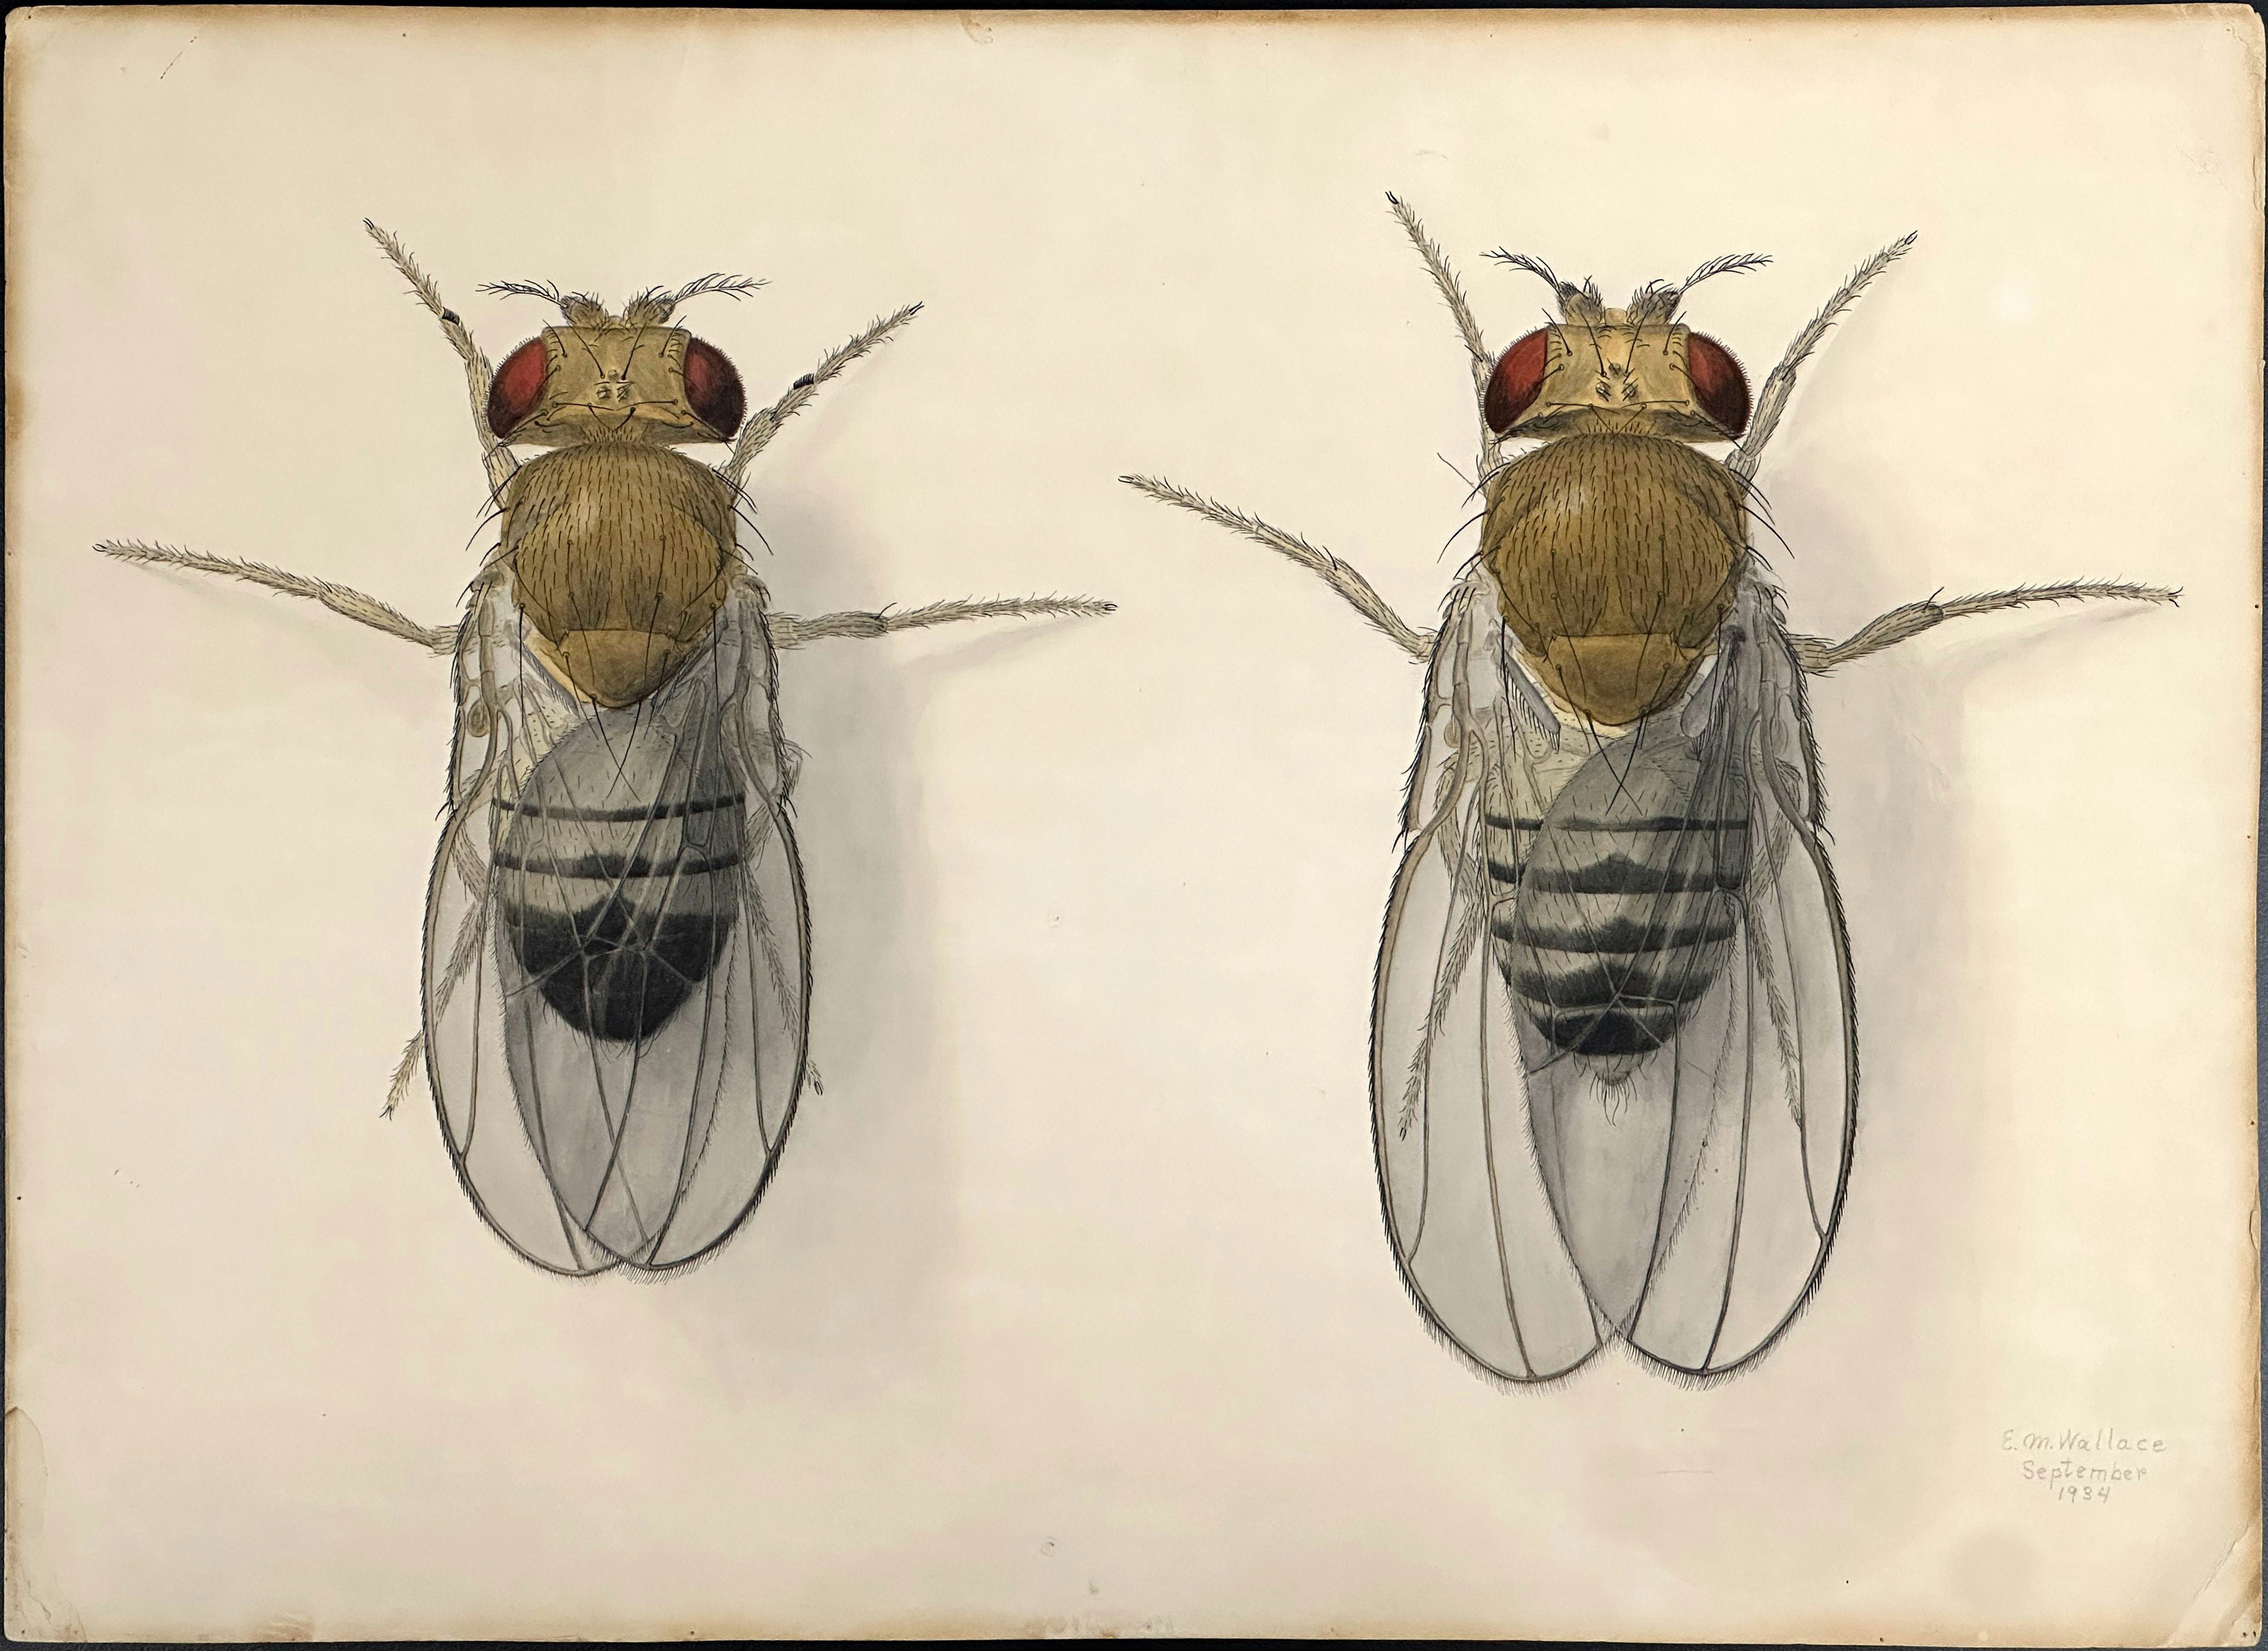 "Drosophila," 1934, Edith M. Wallace. Ink and watercolor on paper. ©California Institute of Technology.